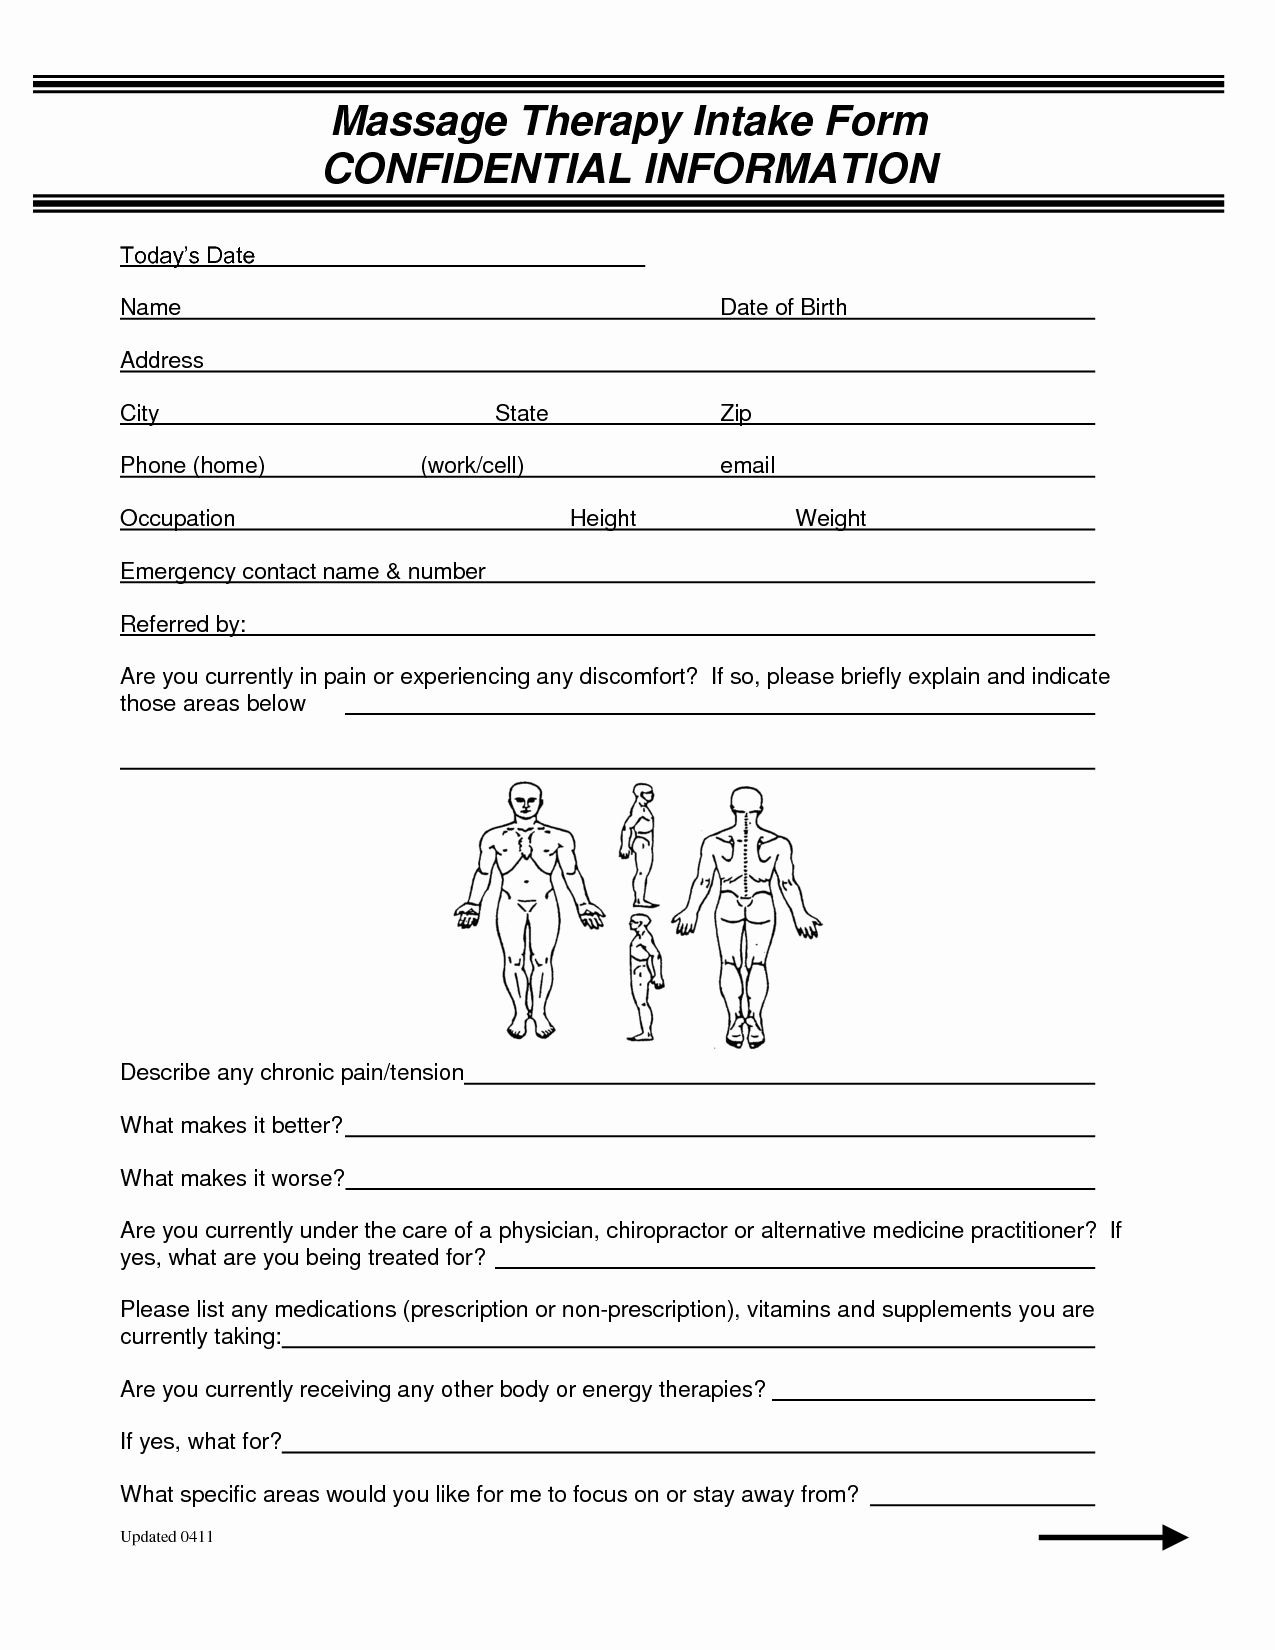 Acupuncture Intake form Template Elegant soap Note Massage therapy Blank Google Search